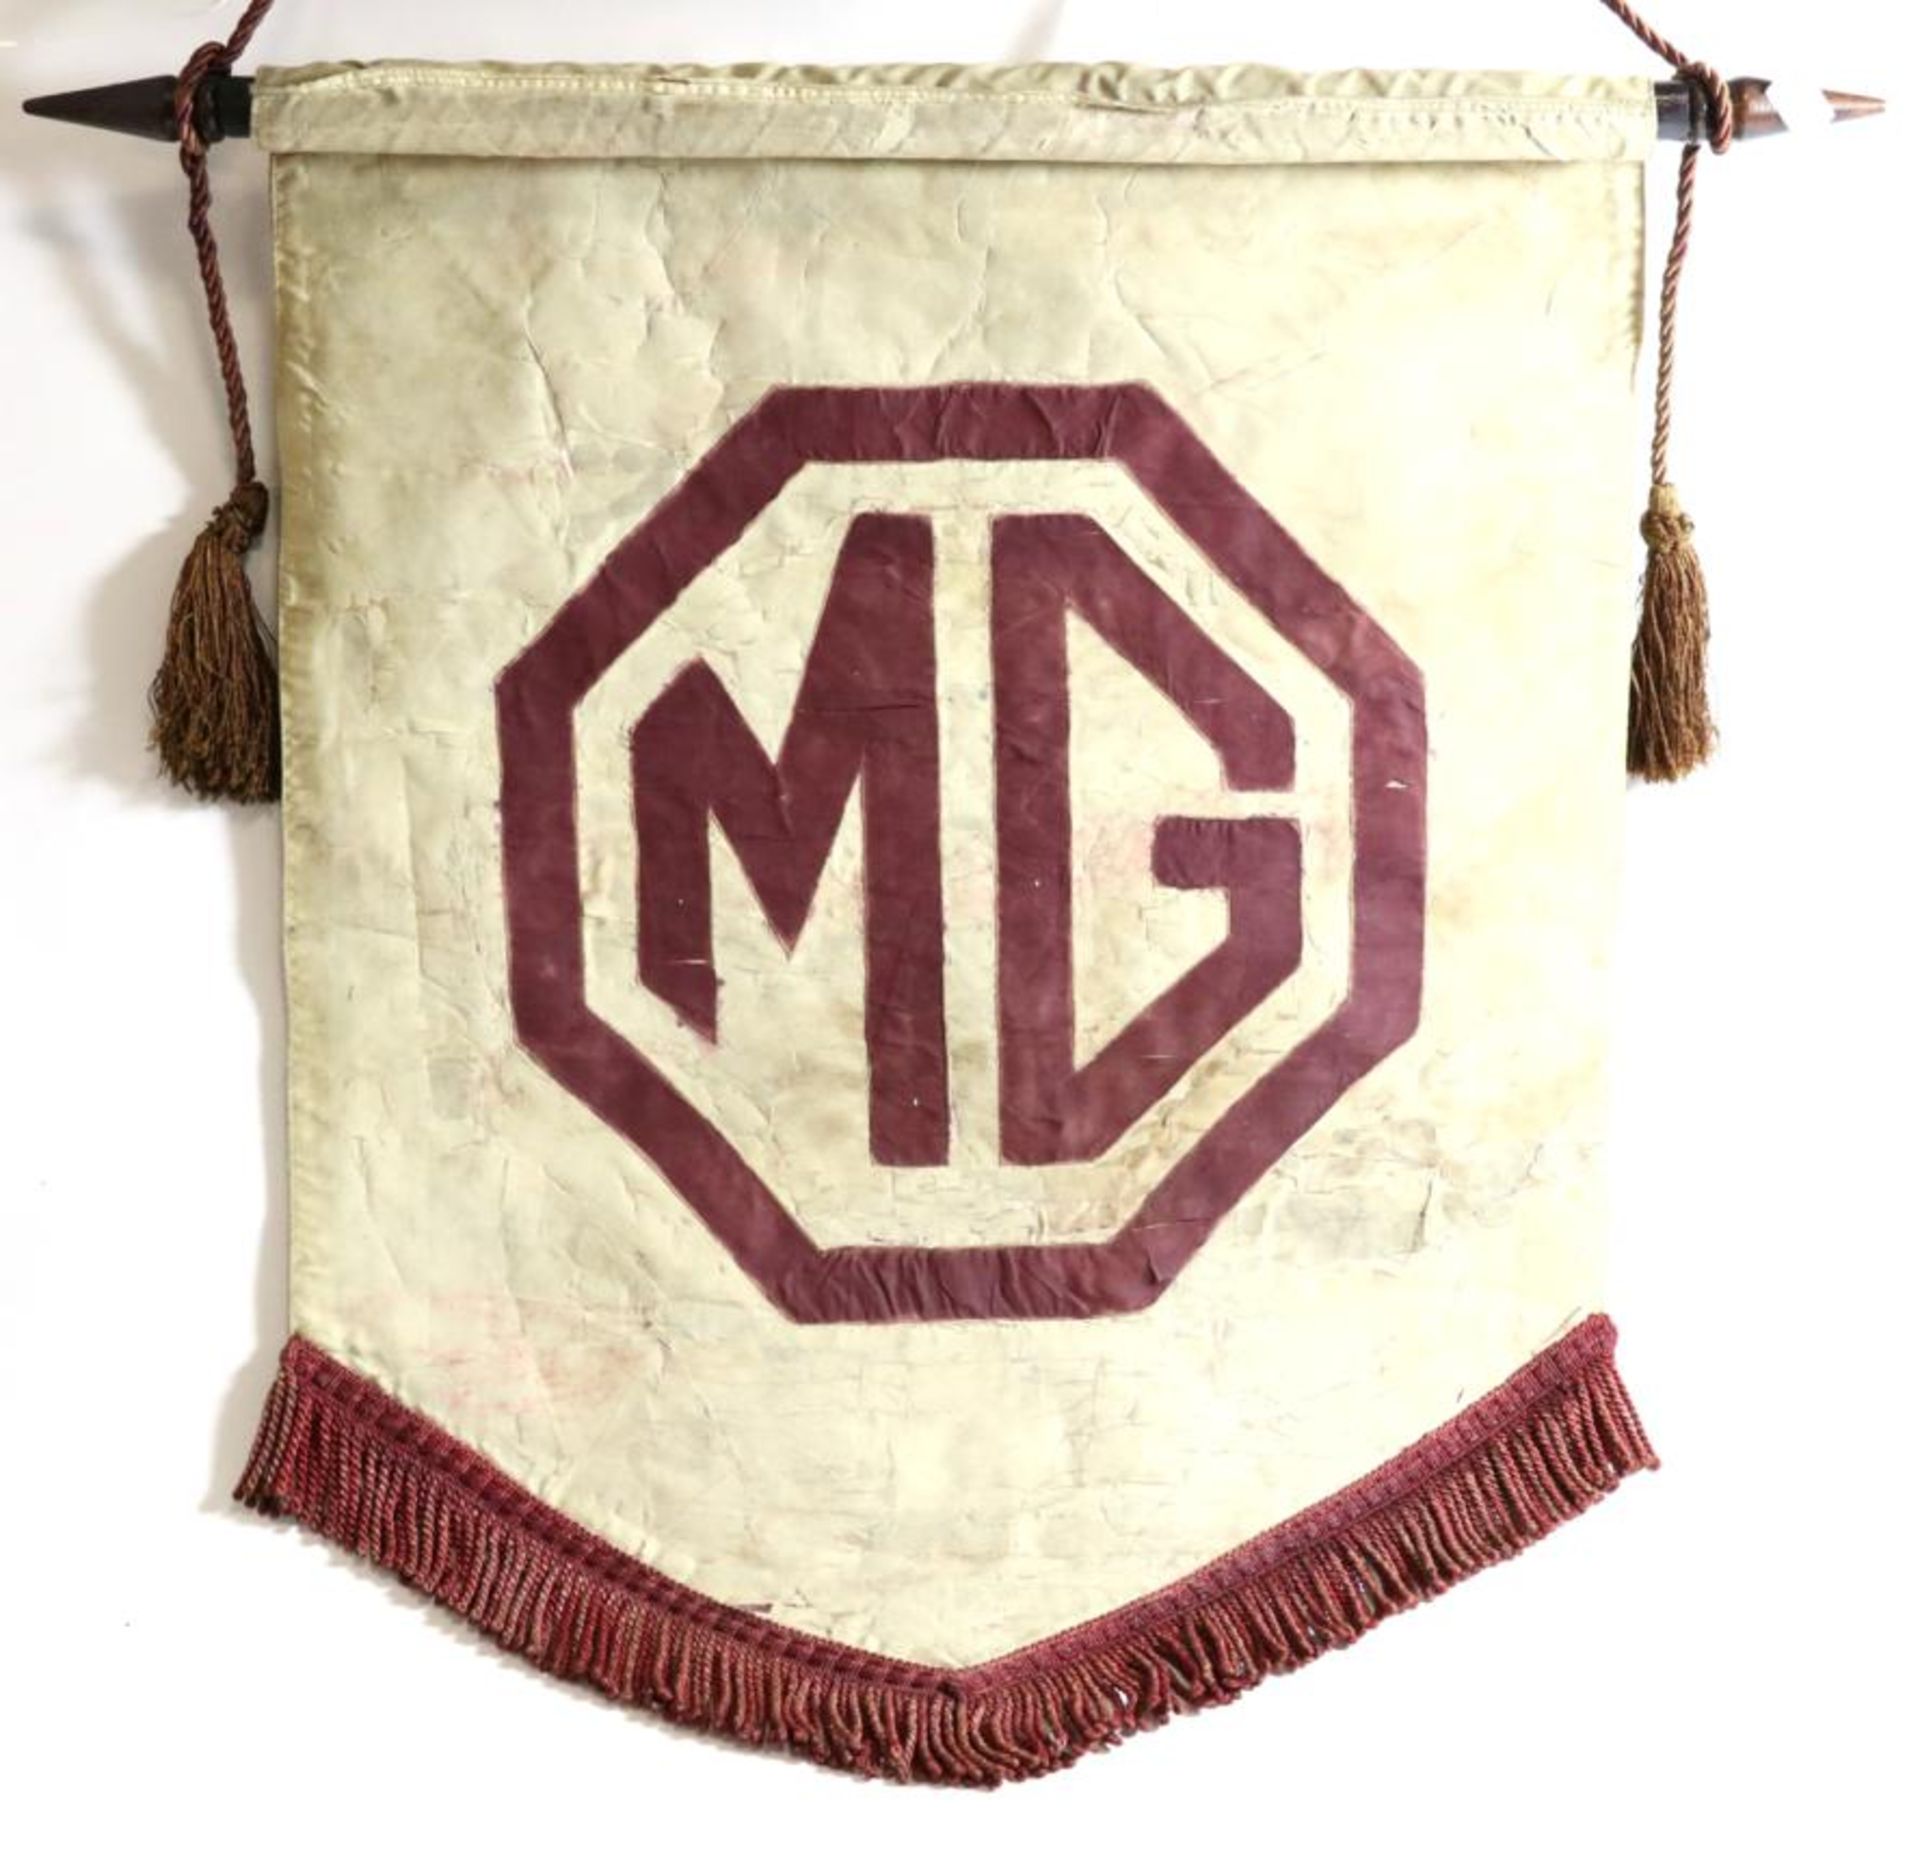 A Vintage MG Pennant Flag on Fabric, of shield shaped form with tasselled edge, suspended on a